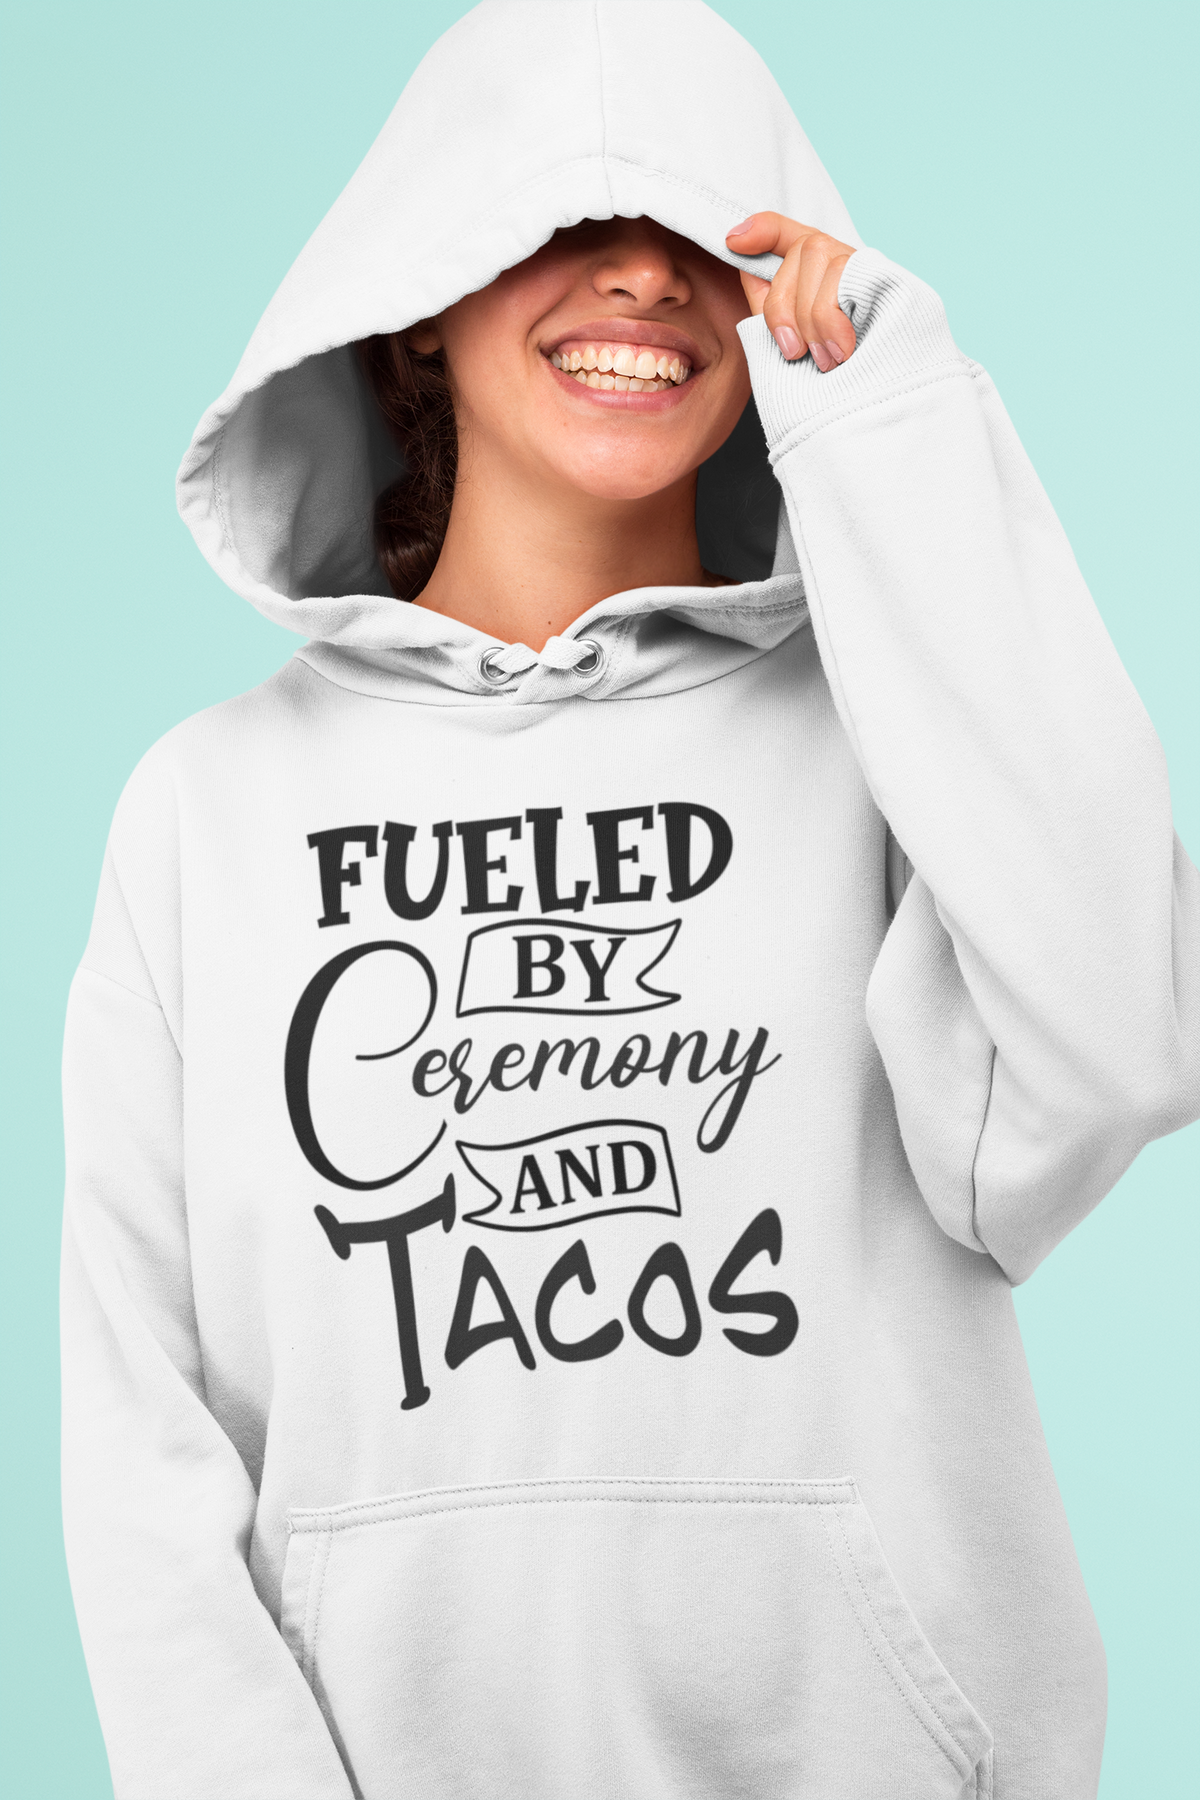 Fueled by Ceremony and Tacos